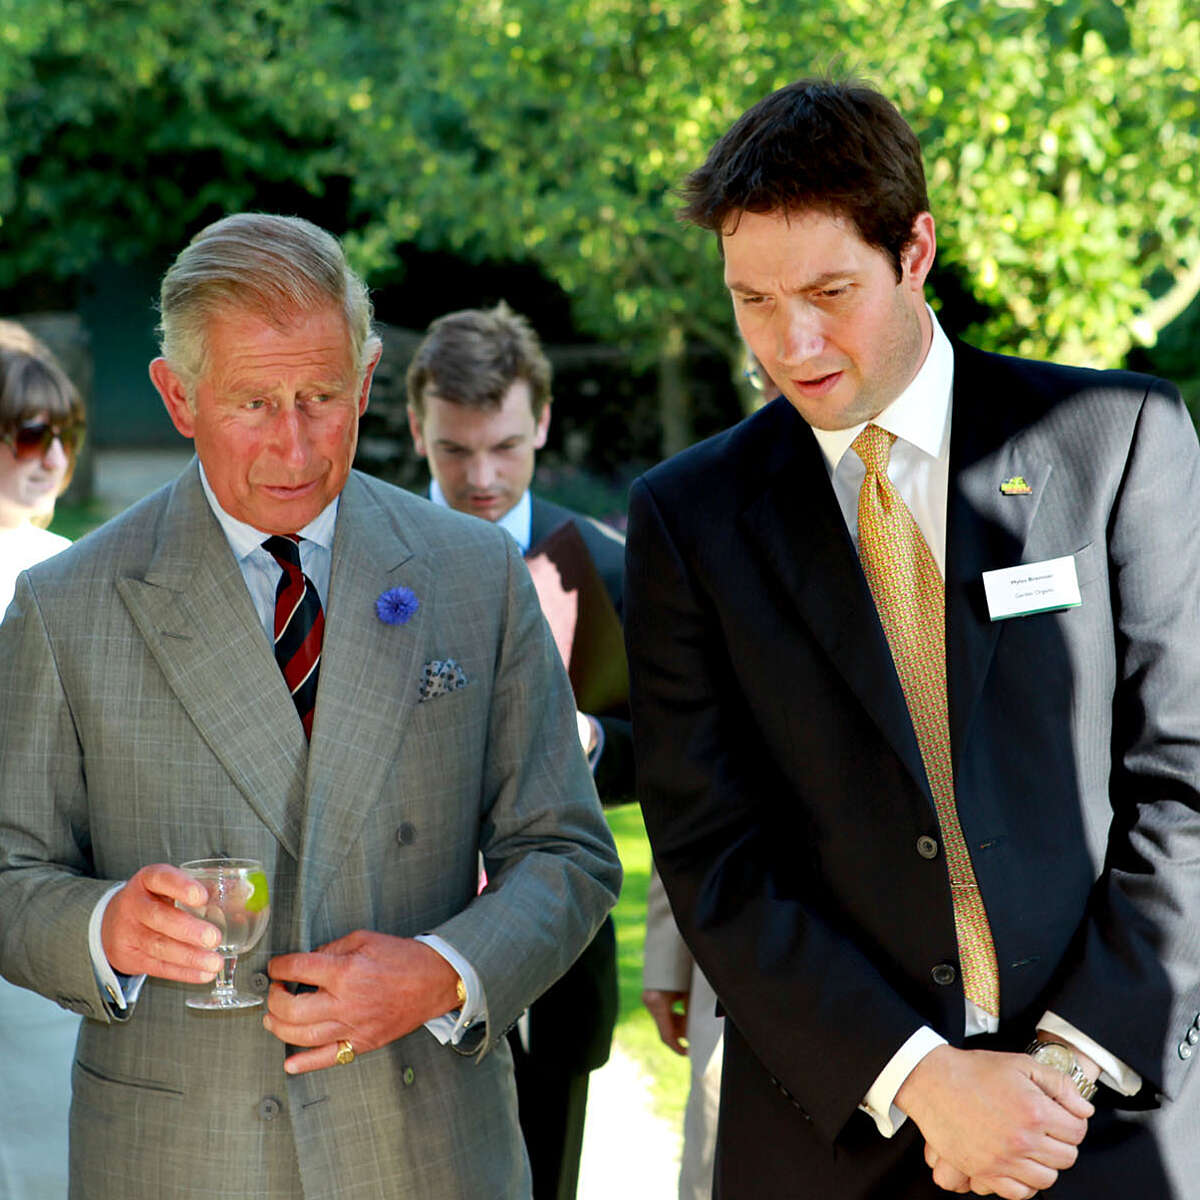 Our Patron the former Prince of Wales tours Ryton Gardens with CEO Myles Bremner